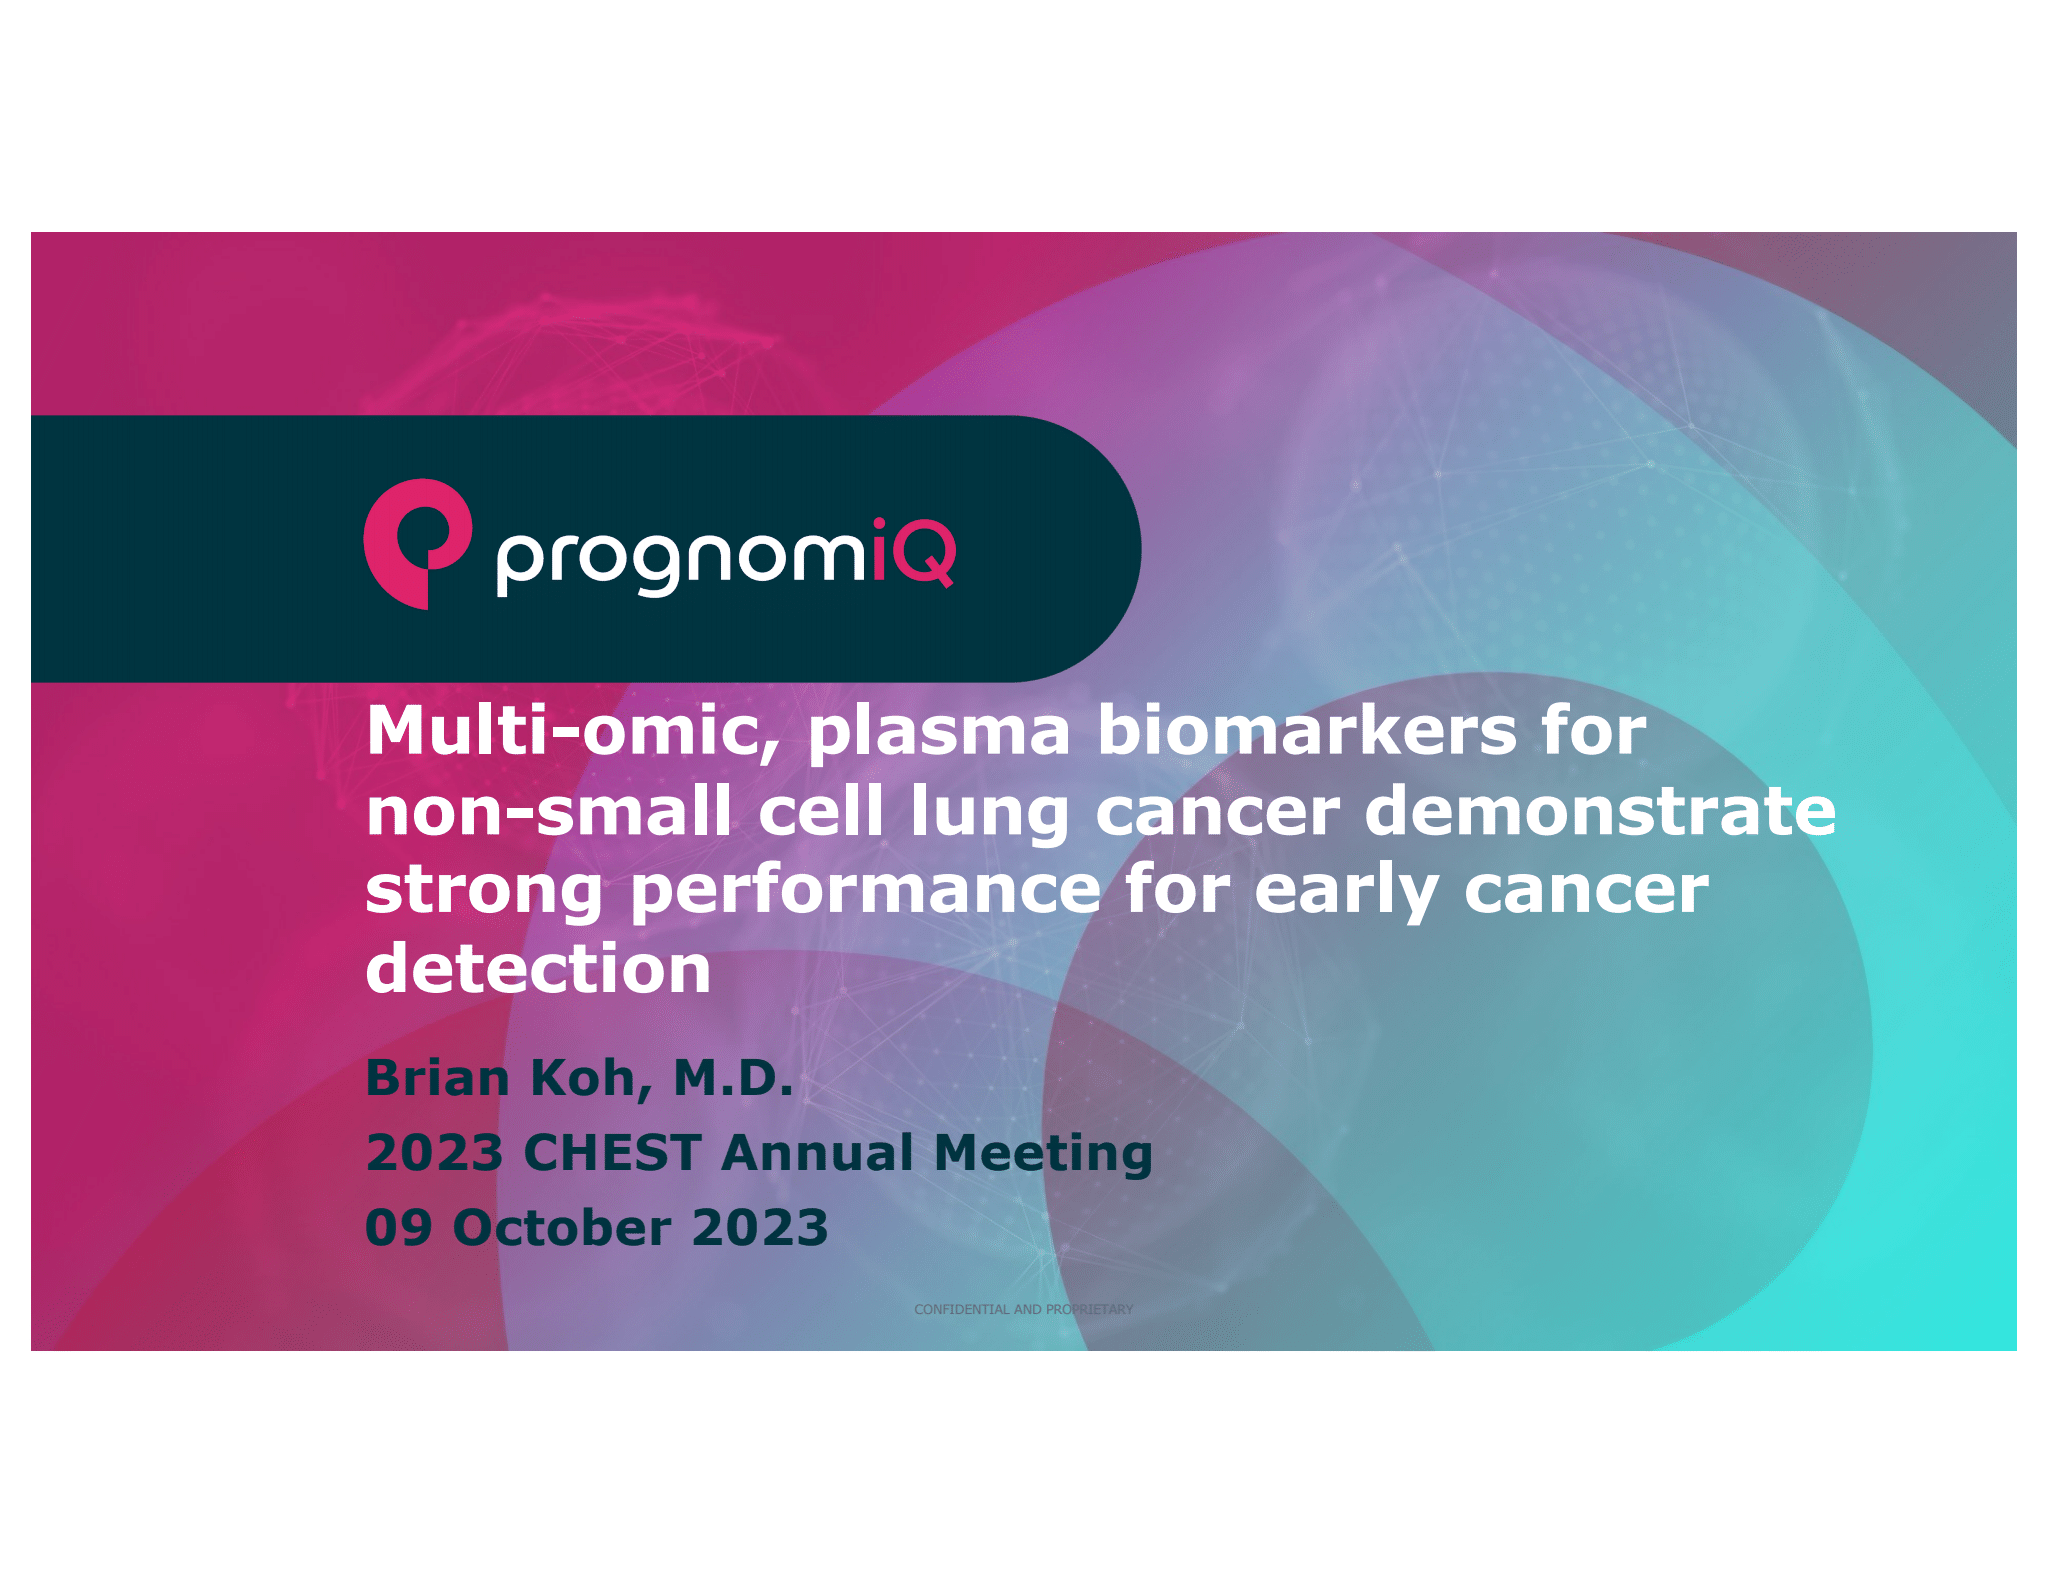 scientific poster showing multi-omic, plasma biomarkers for non-small cell lung cancer demonstrate strong performance for early cancer detection